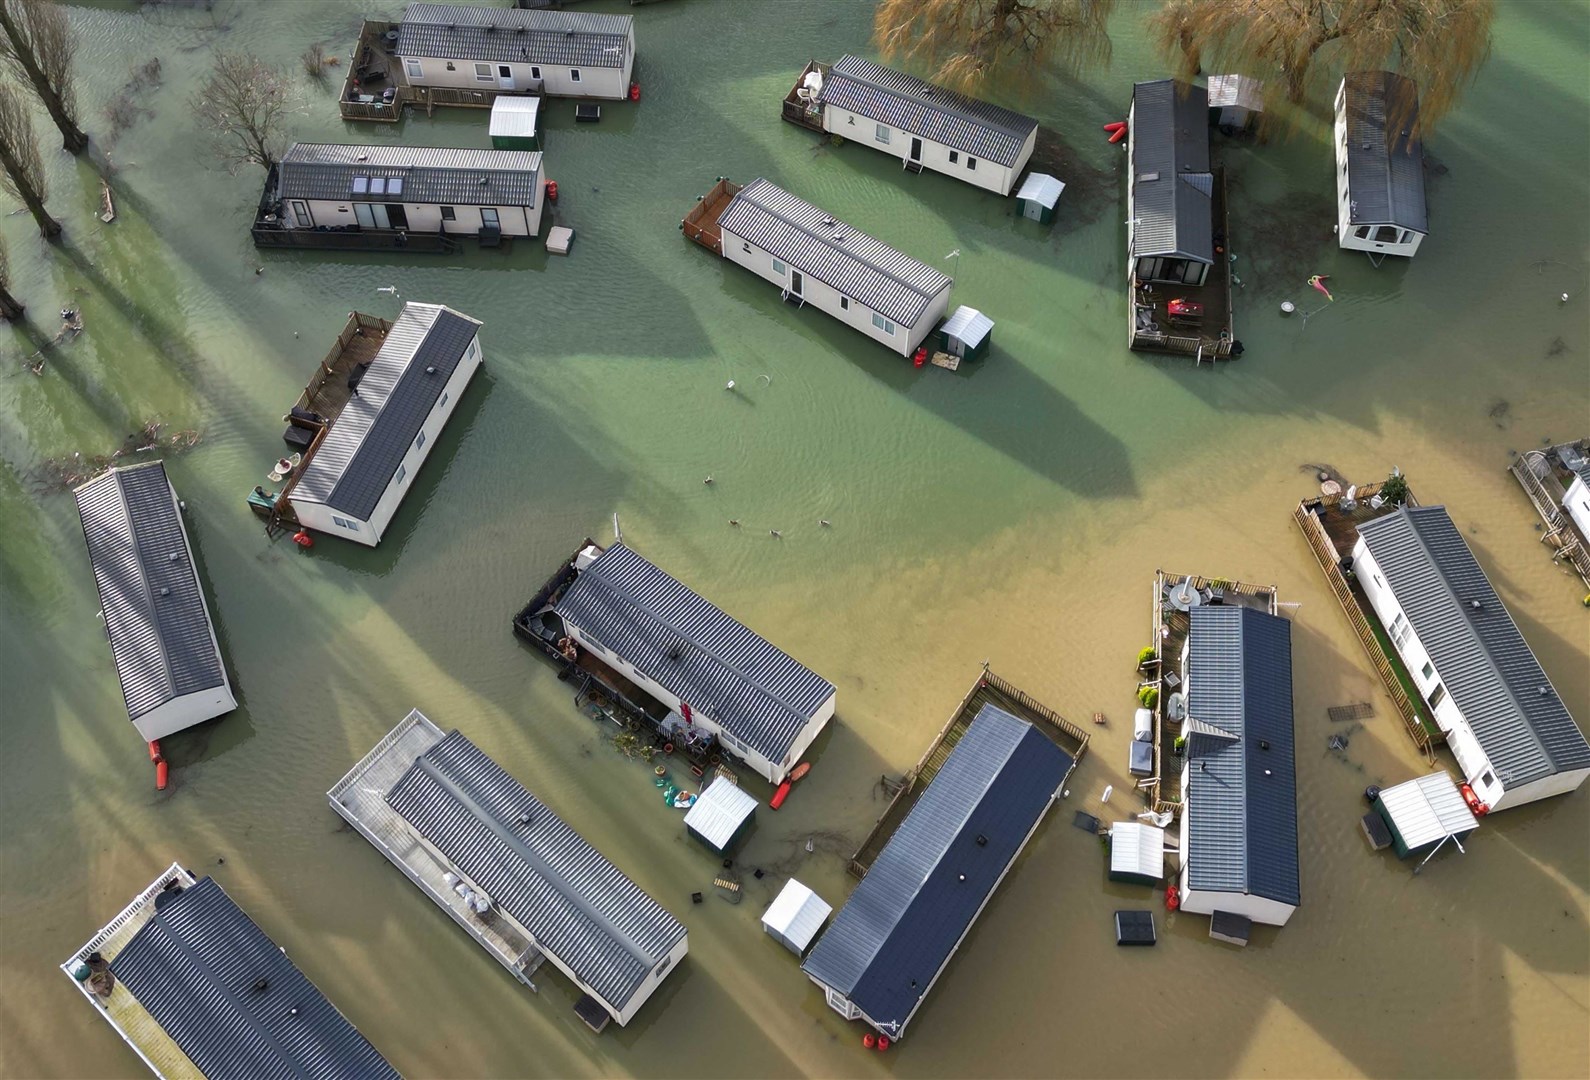 Holiday homes in Northampton surrounded by water after Storm Henk (Jacob King/PA)